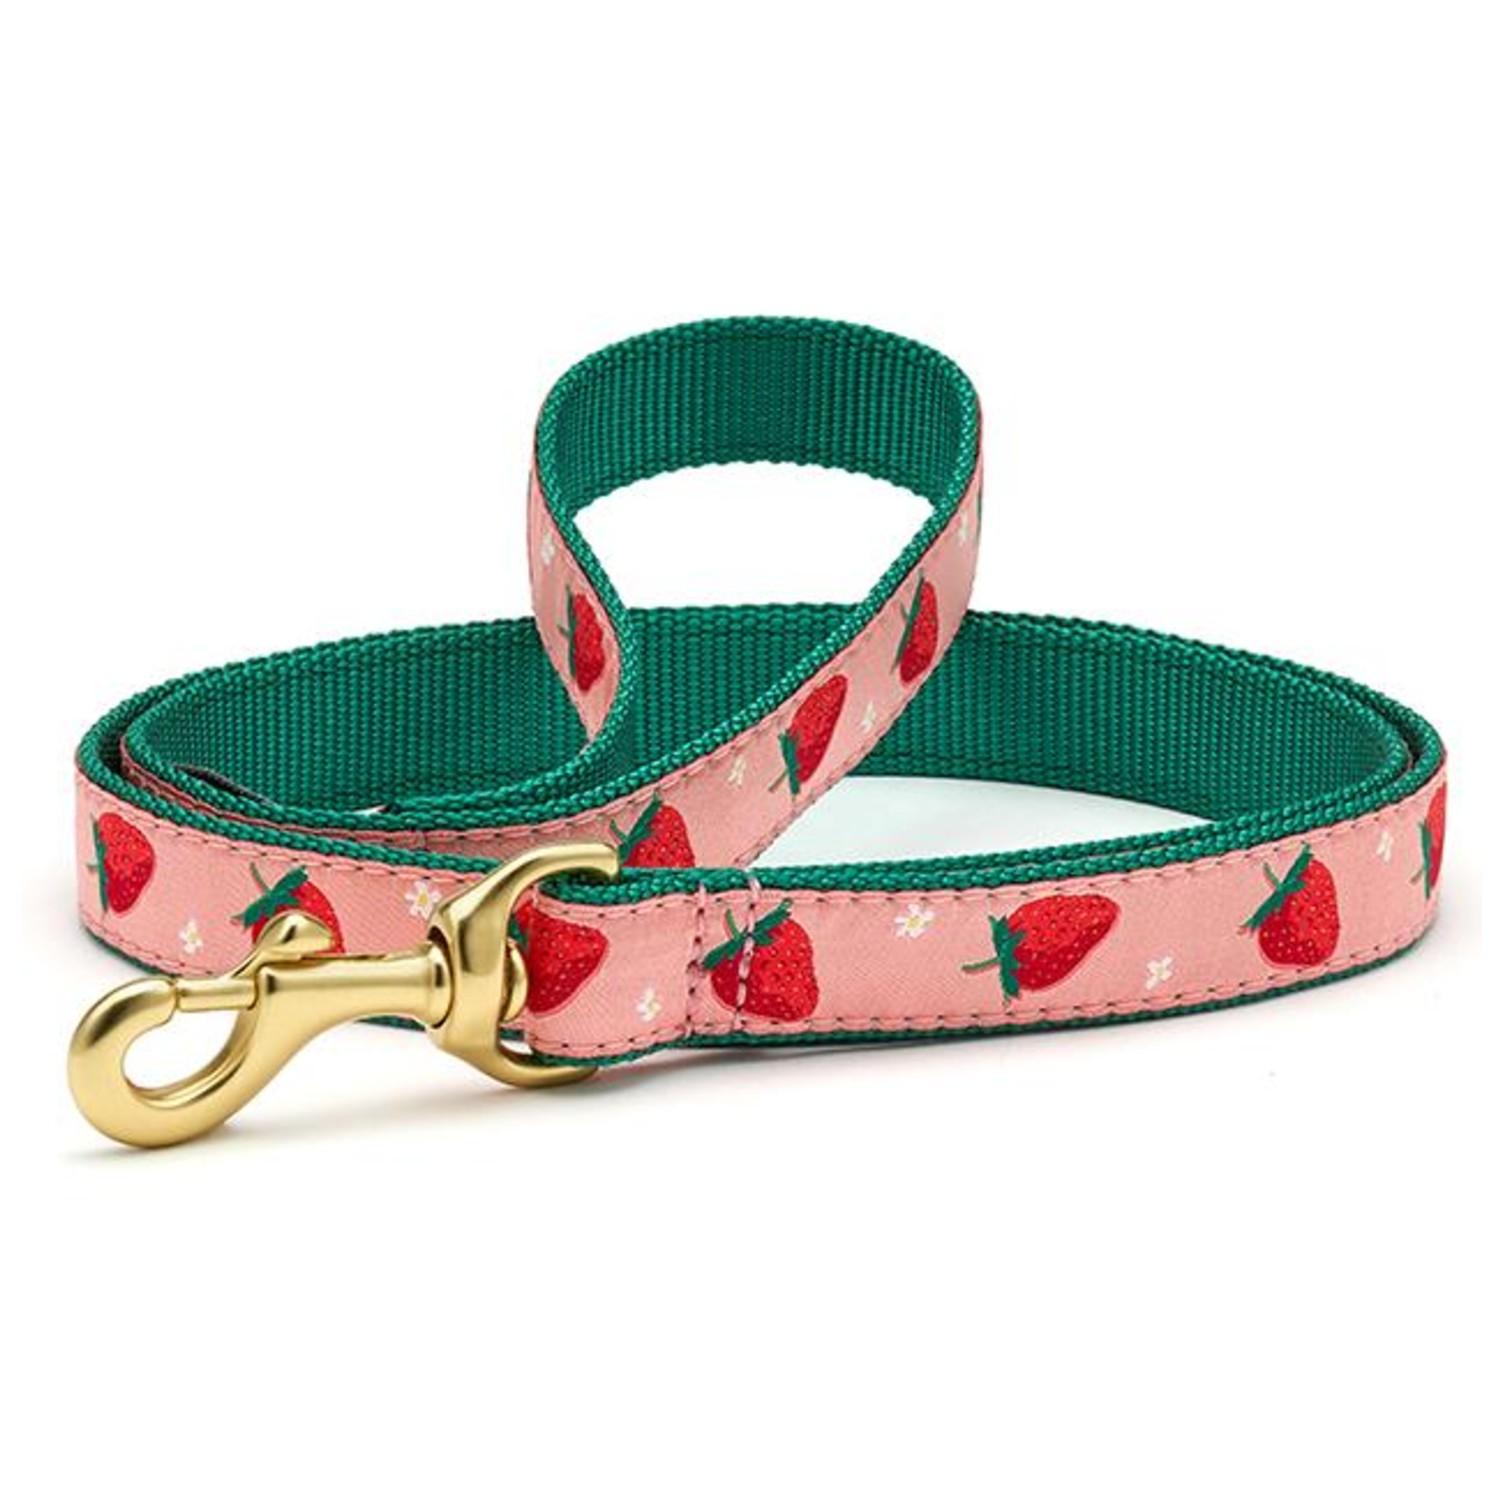 Strawberry Fields Dog Leash by Up Country